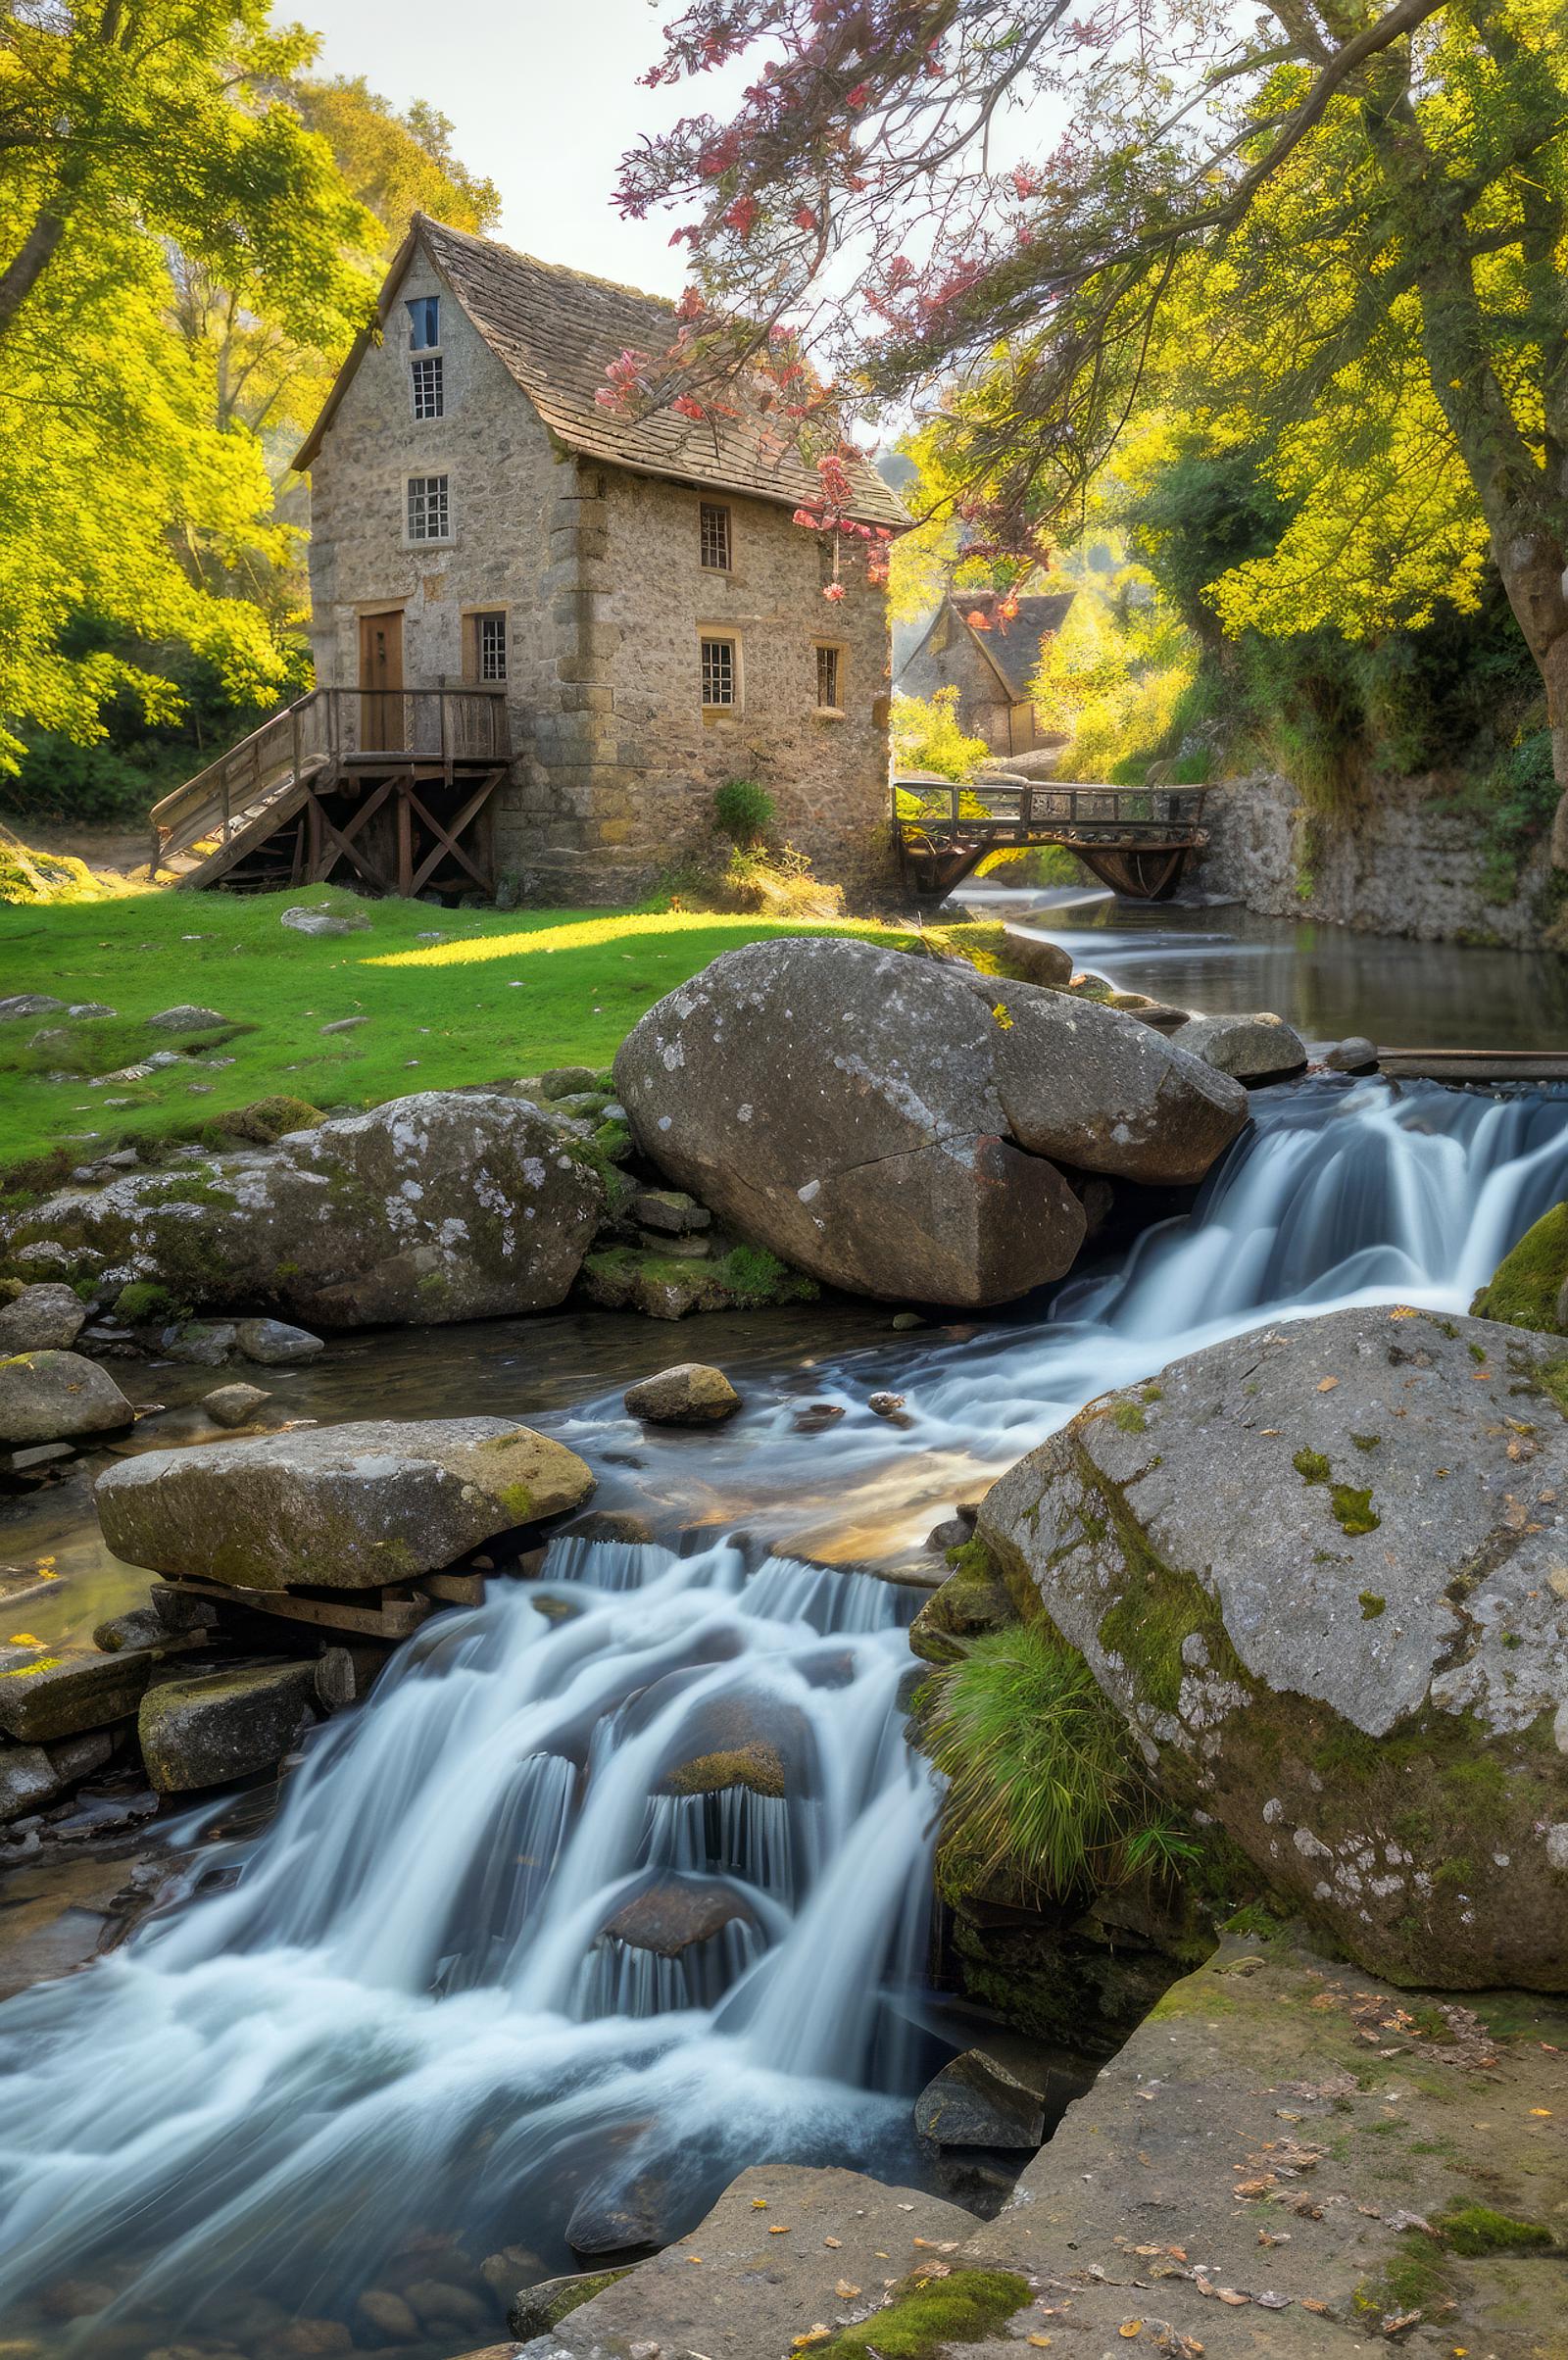 A picturesque view of a stream flowing through a village with a stone house and bridge. The stream is surrounded by greenery and rocks, creating a serene and peaceful atmosphere.